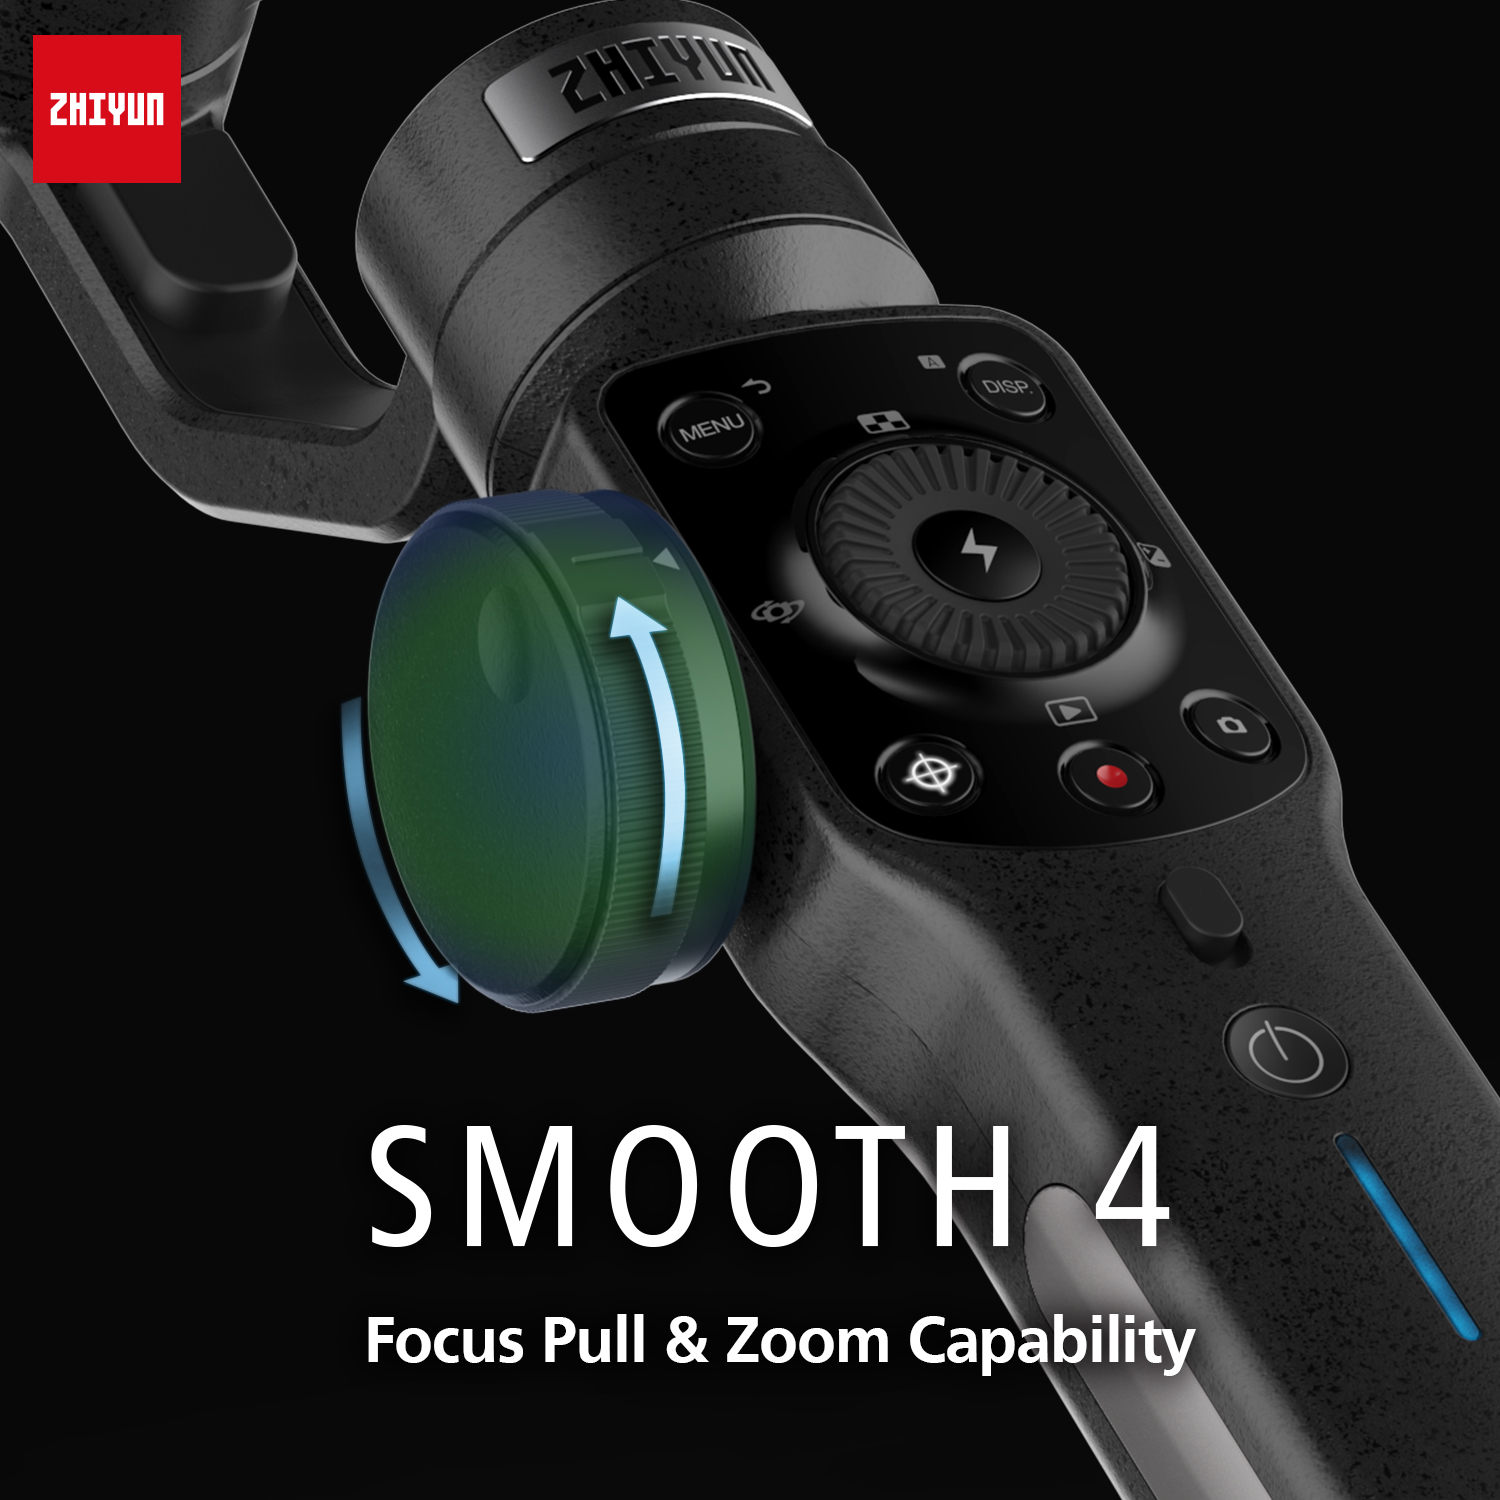 Zhiyun smooth 4 3-axis handheld smartphone gimbal stabilizer for iphone xs xr x 8plus 8 7p 7 samsung s9 s8 s7 & action camera